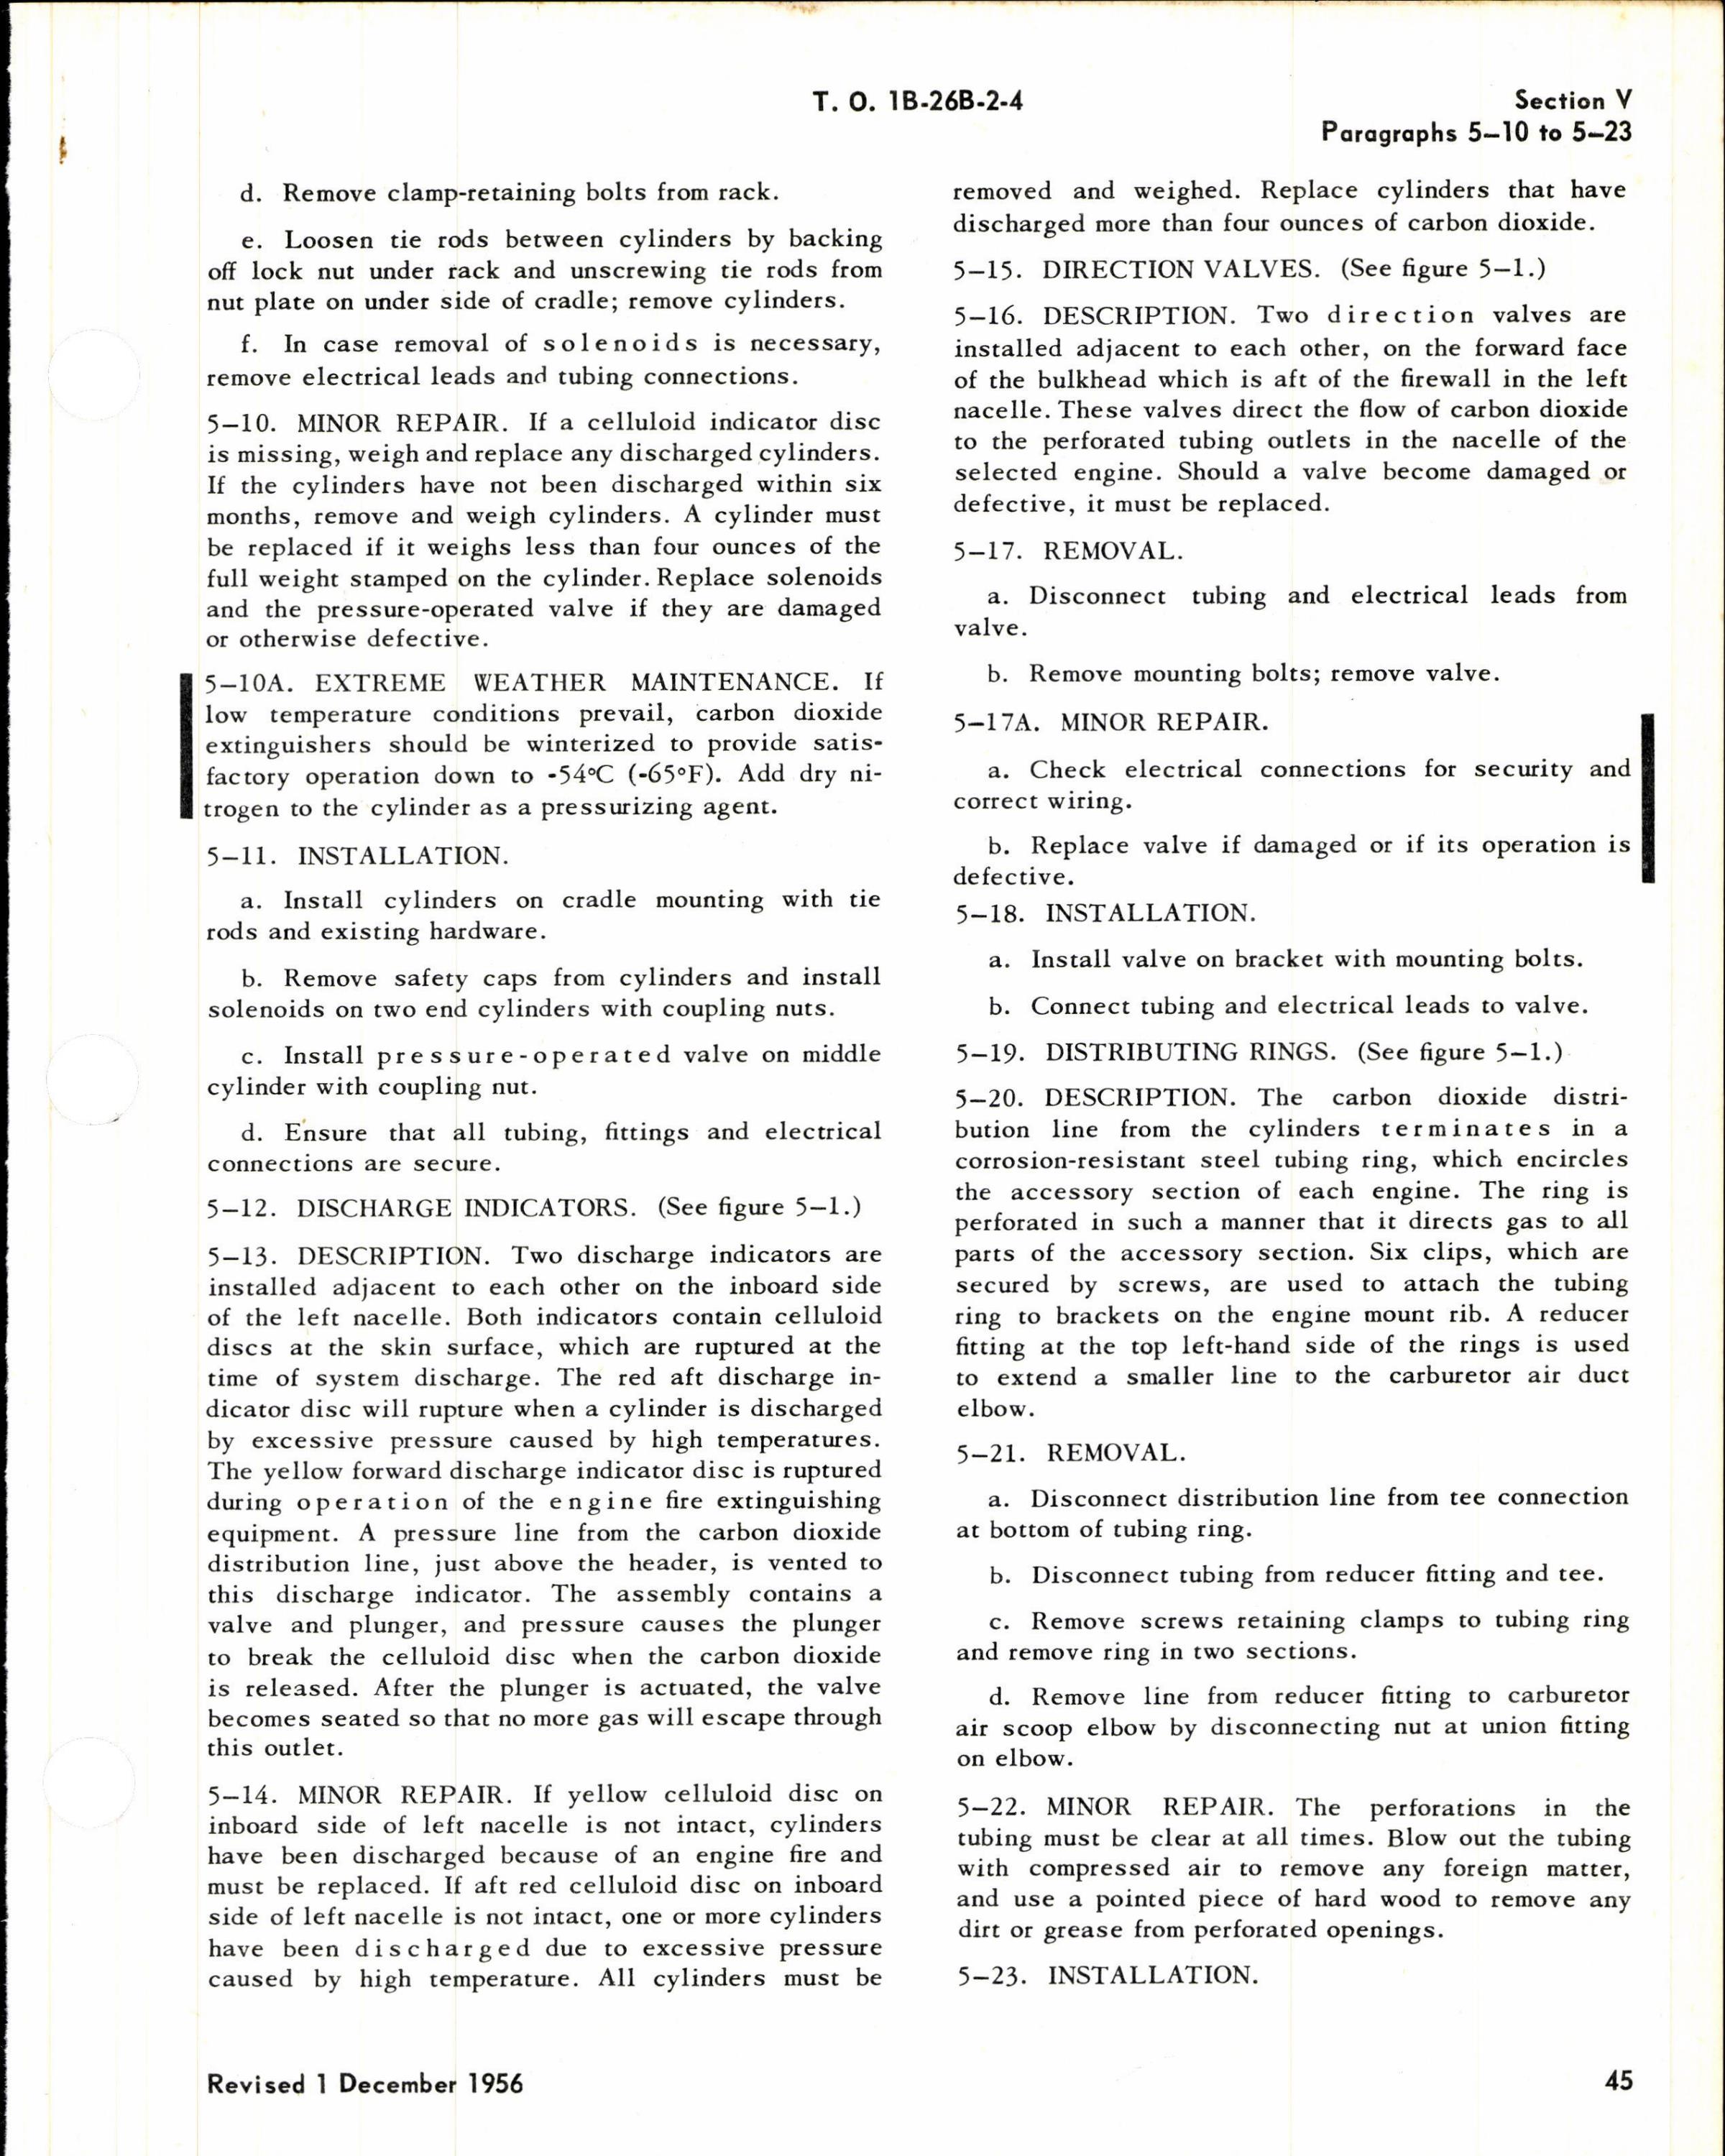 Sample page 3 from AirCorps Library document: Maintenance Instructions for Utility Systems for B-26B, TB-26B, B-26C, and TB-16C